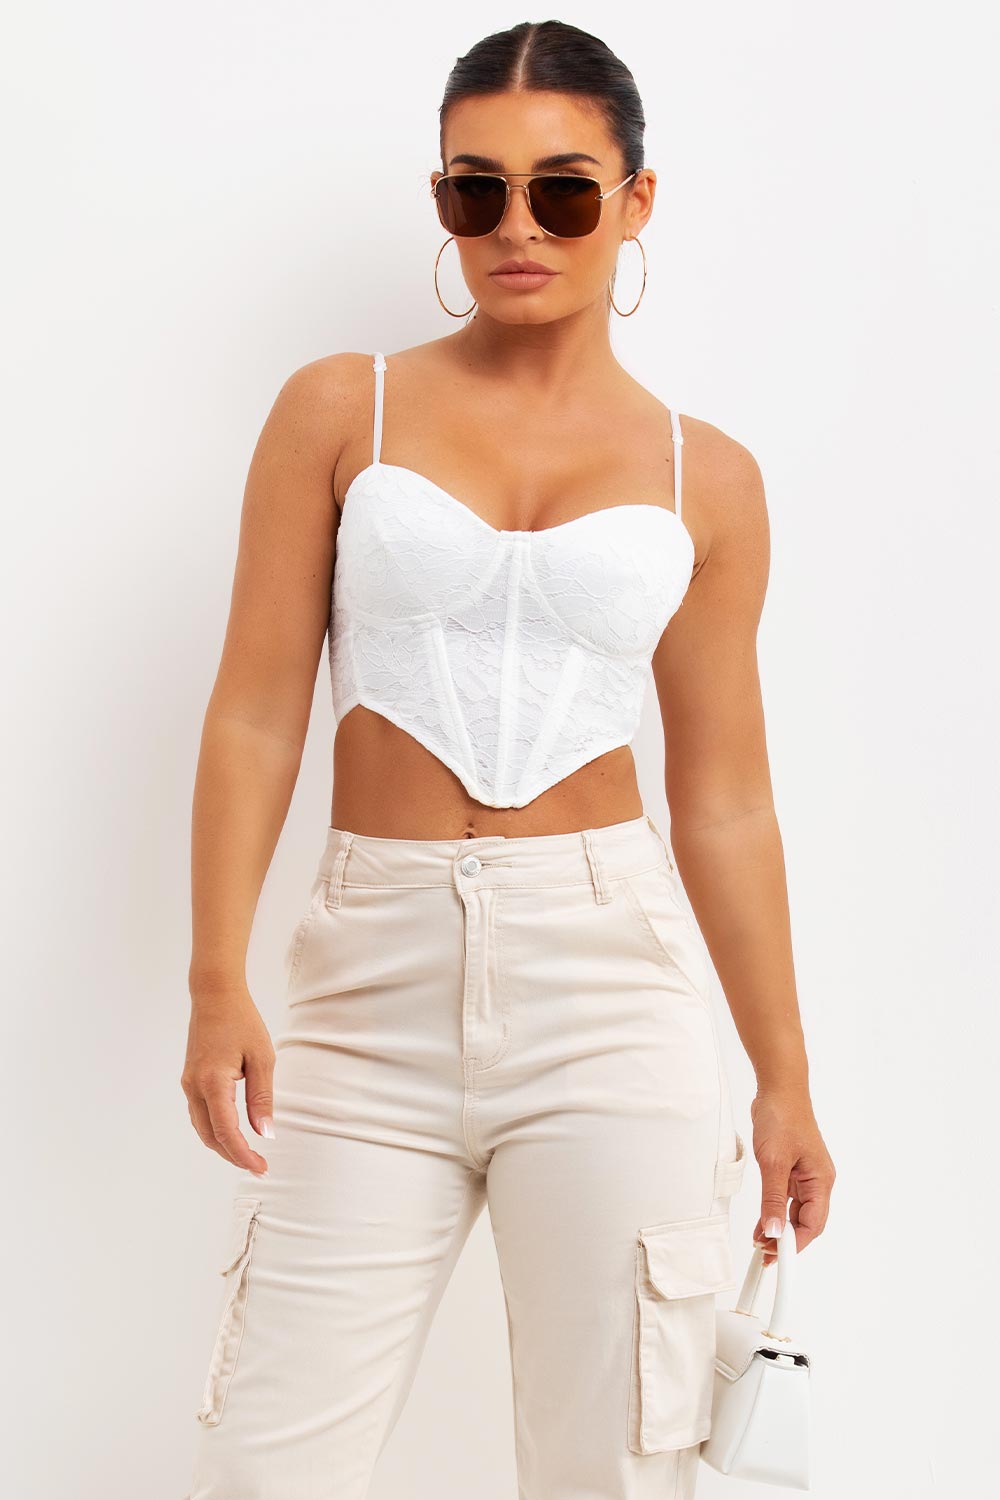 Women's White Lace Up Back Corset Top –